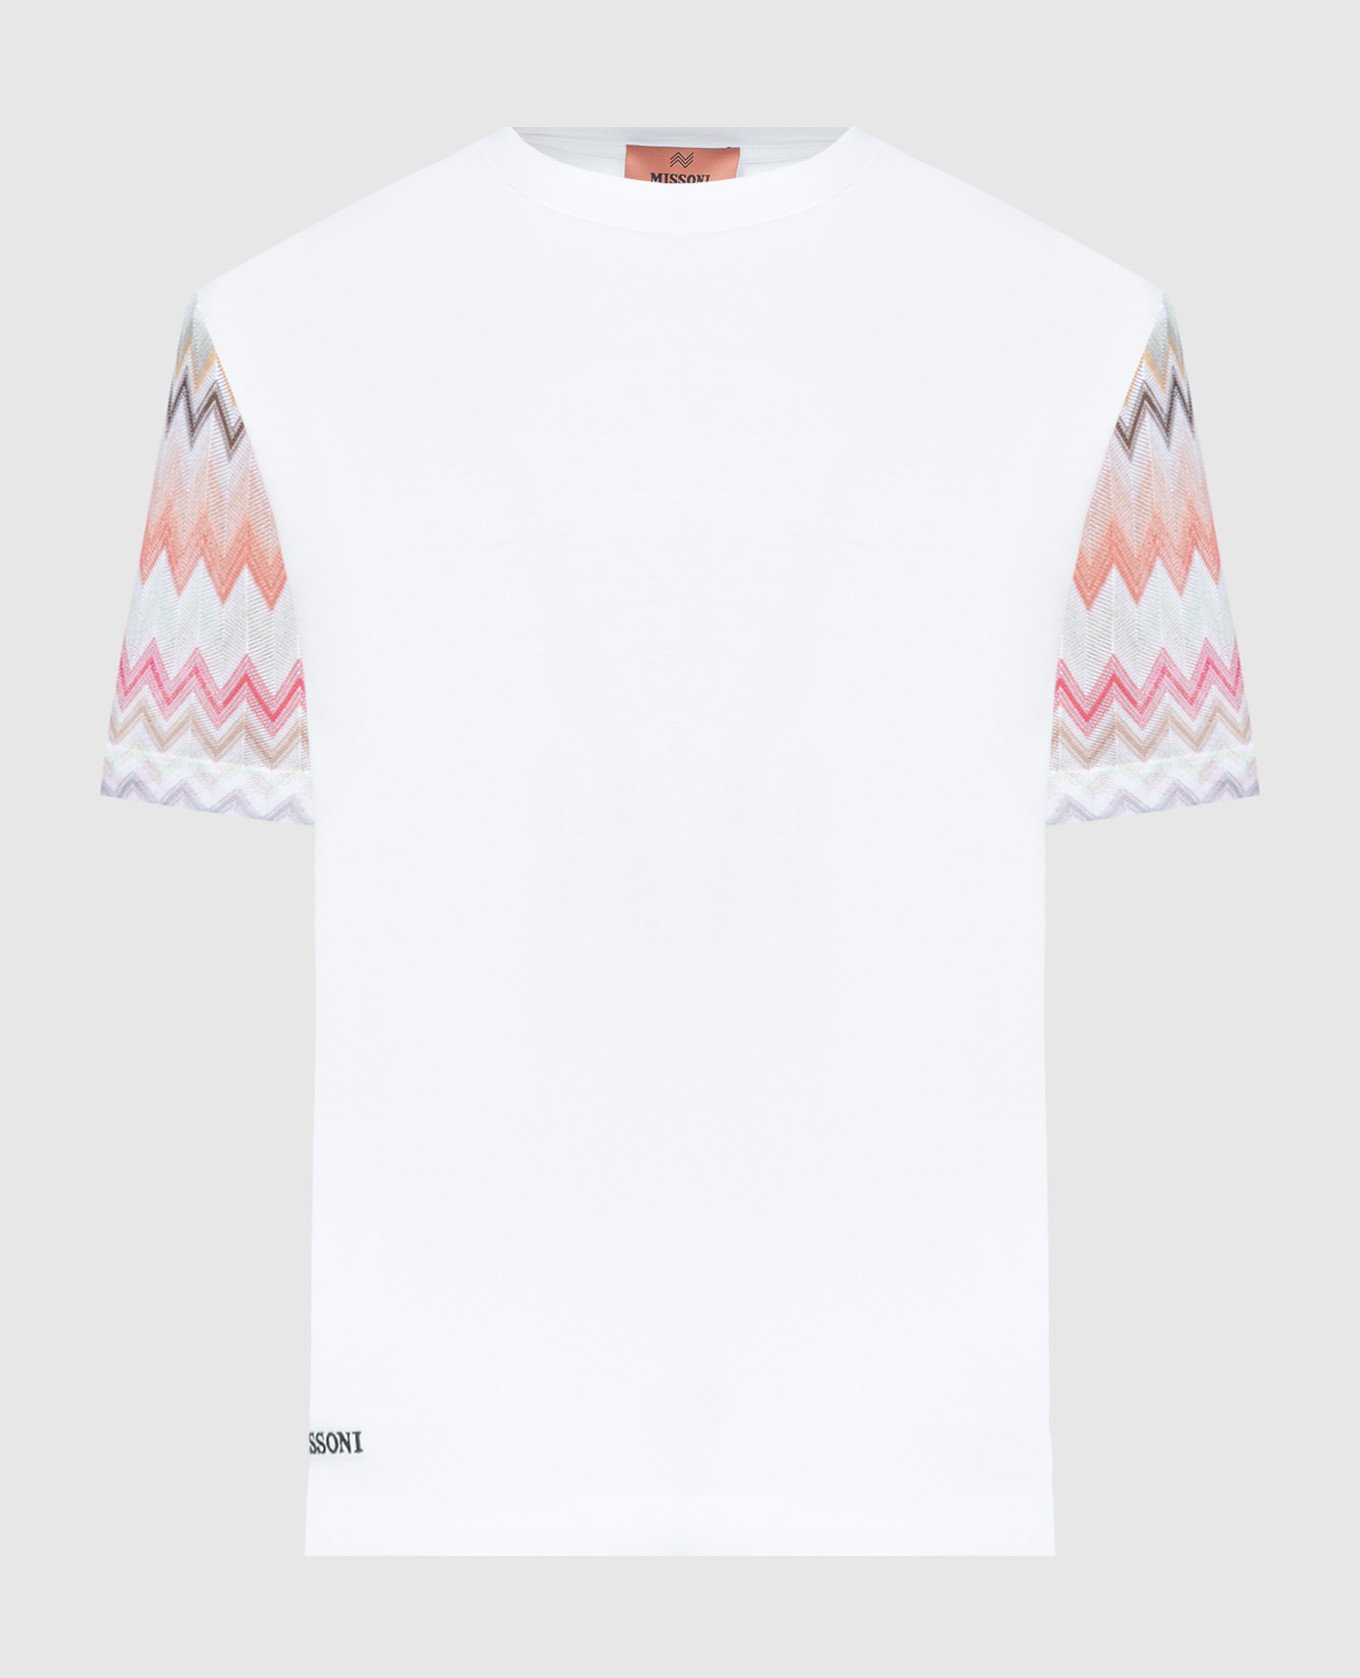 White t-shirt with a geometric pattern and embroidered logo